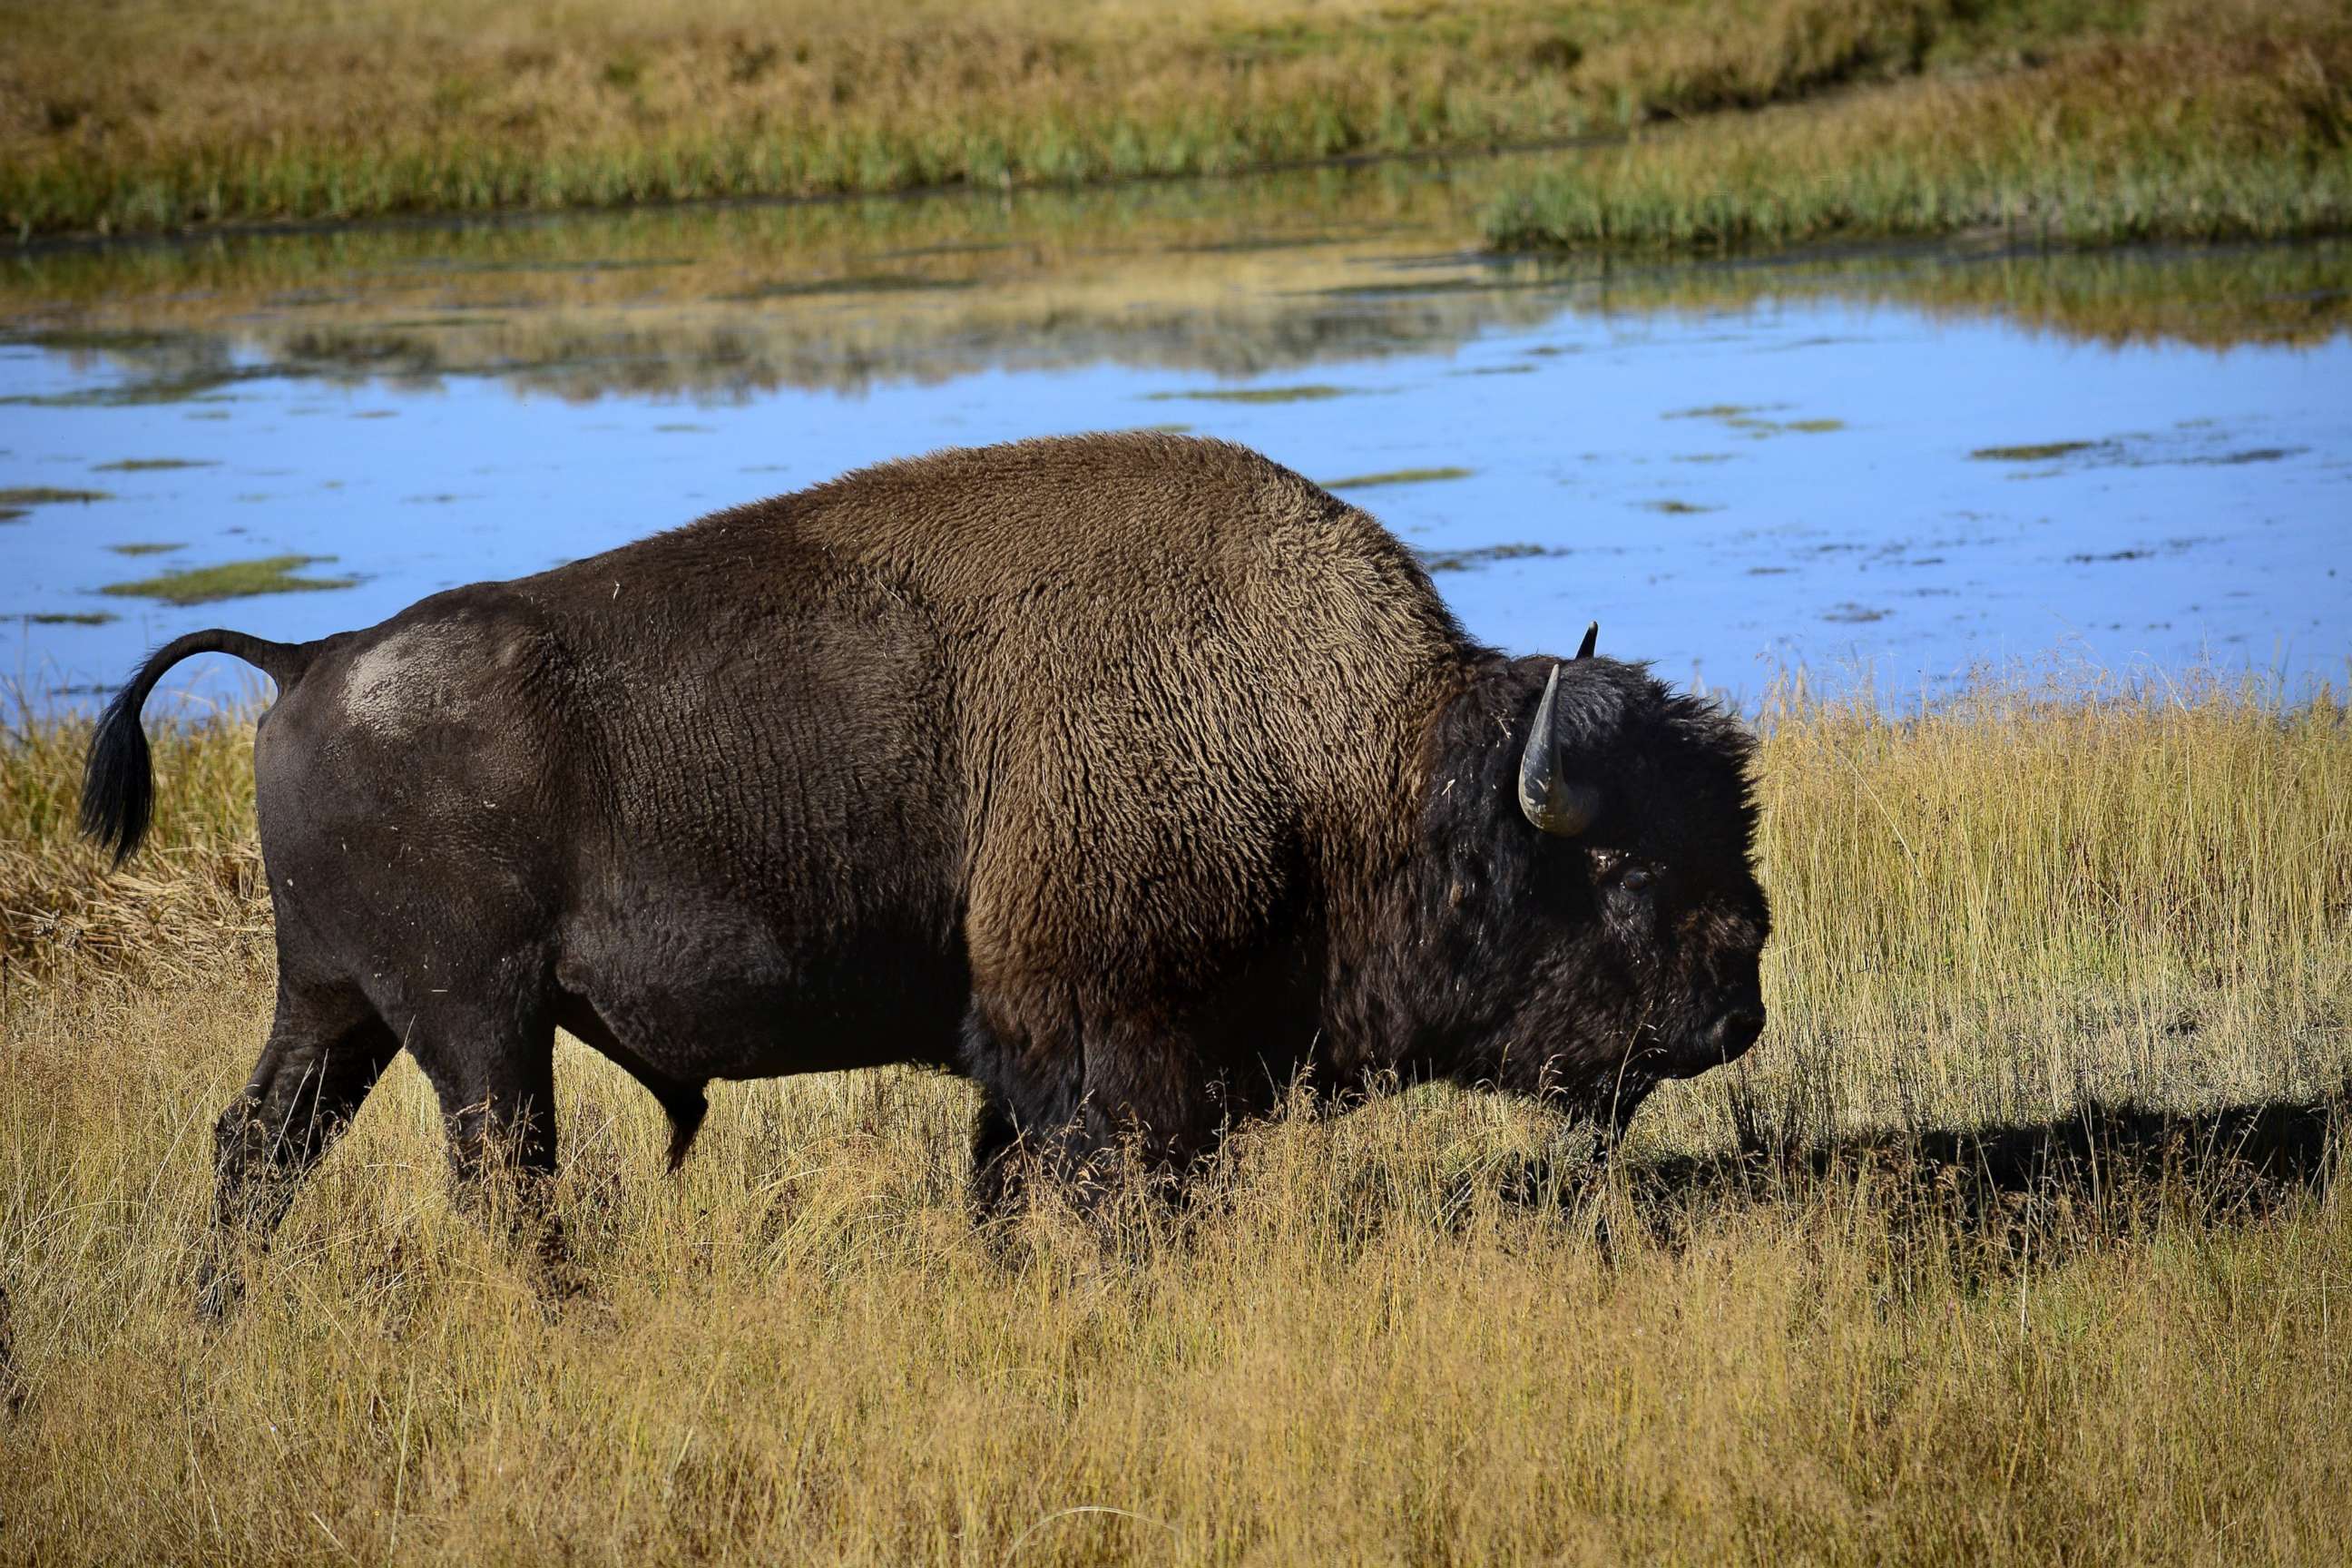 PHOTO: YELLOWSTONE NATIONAL PARK, WY - SEPTEMBER 24, 2014: A bison grazes on grasses in the Hayden Valley section of Yellowstone National Park in Wyoming.